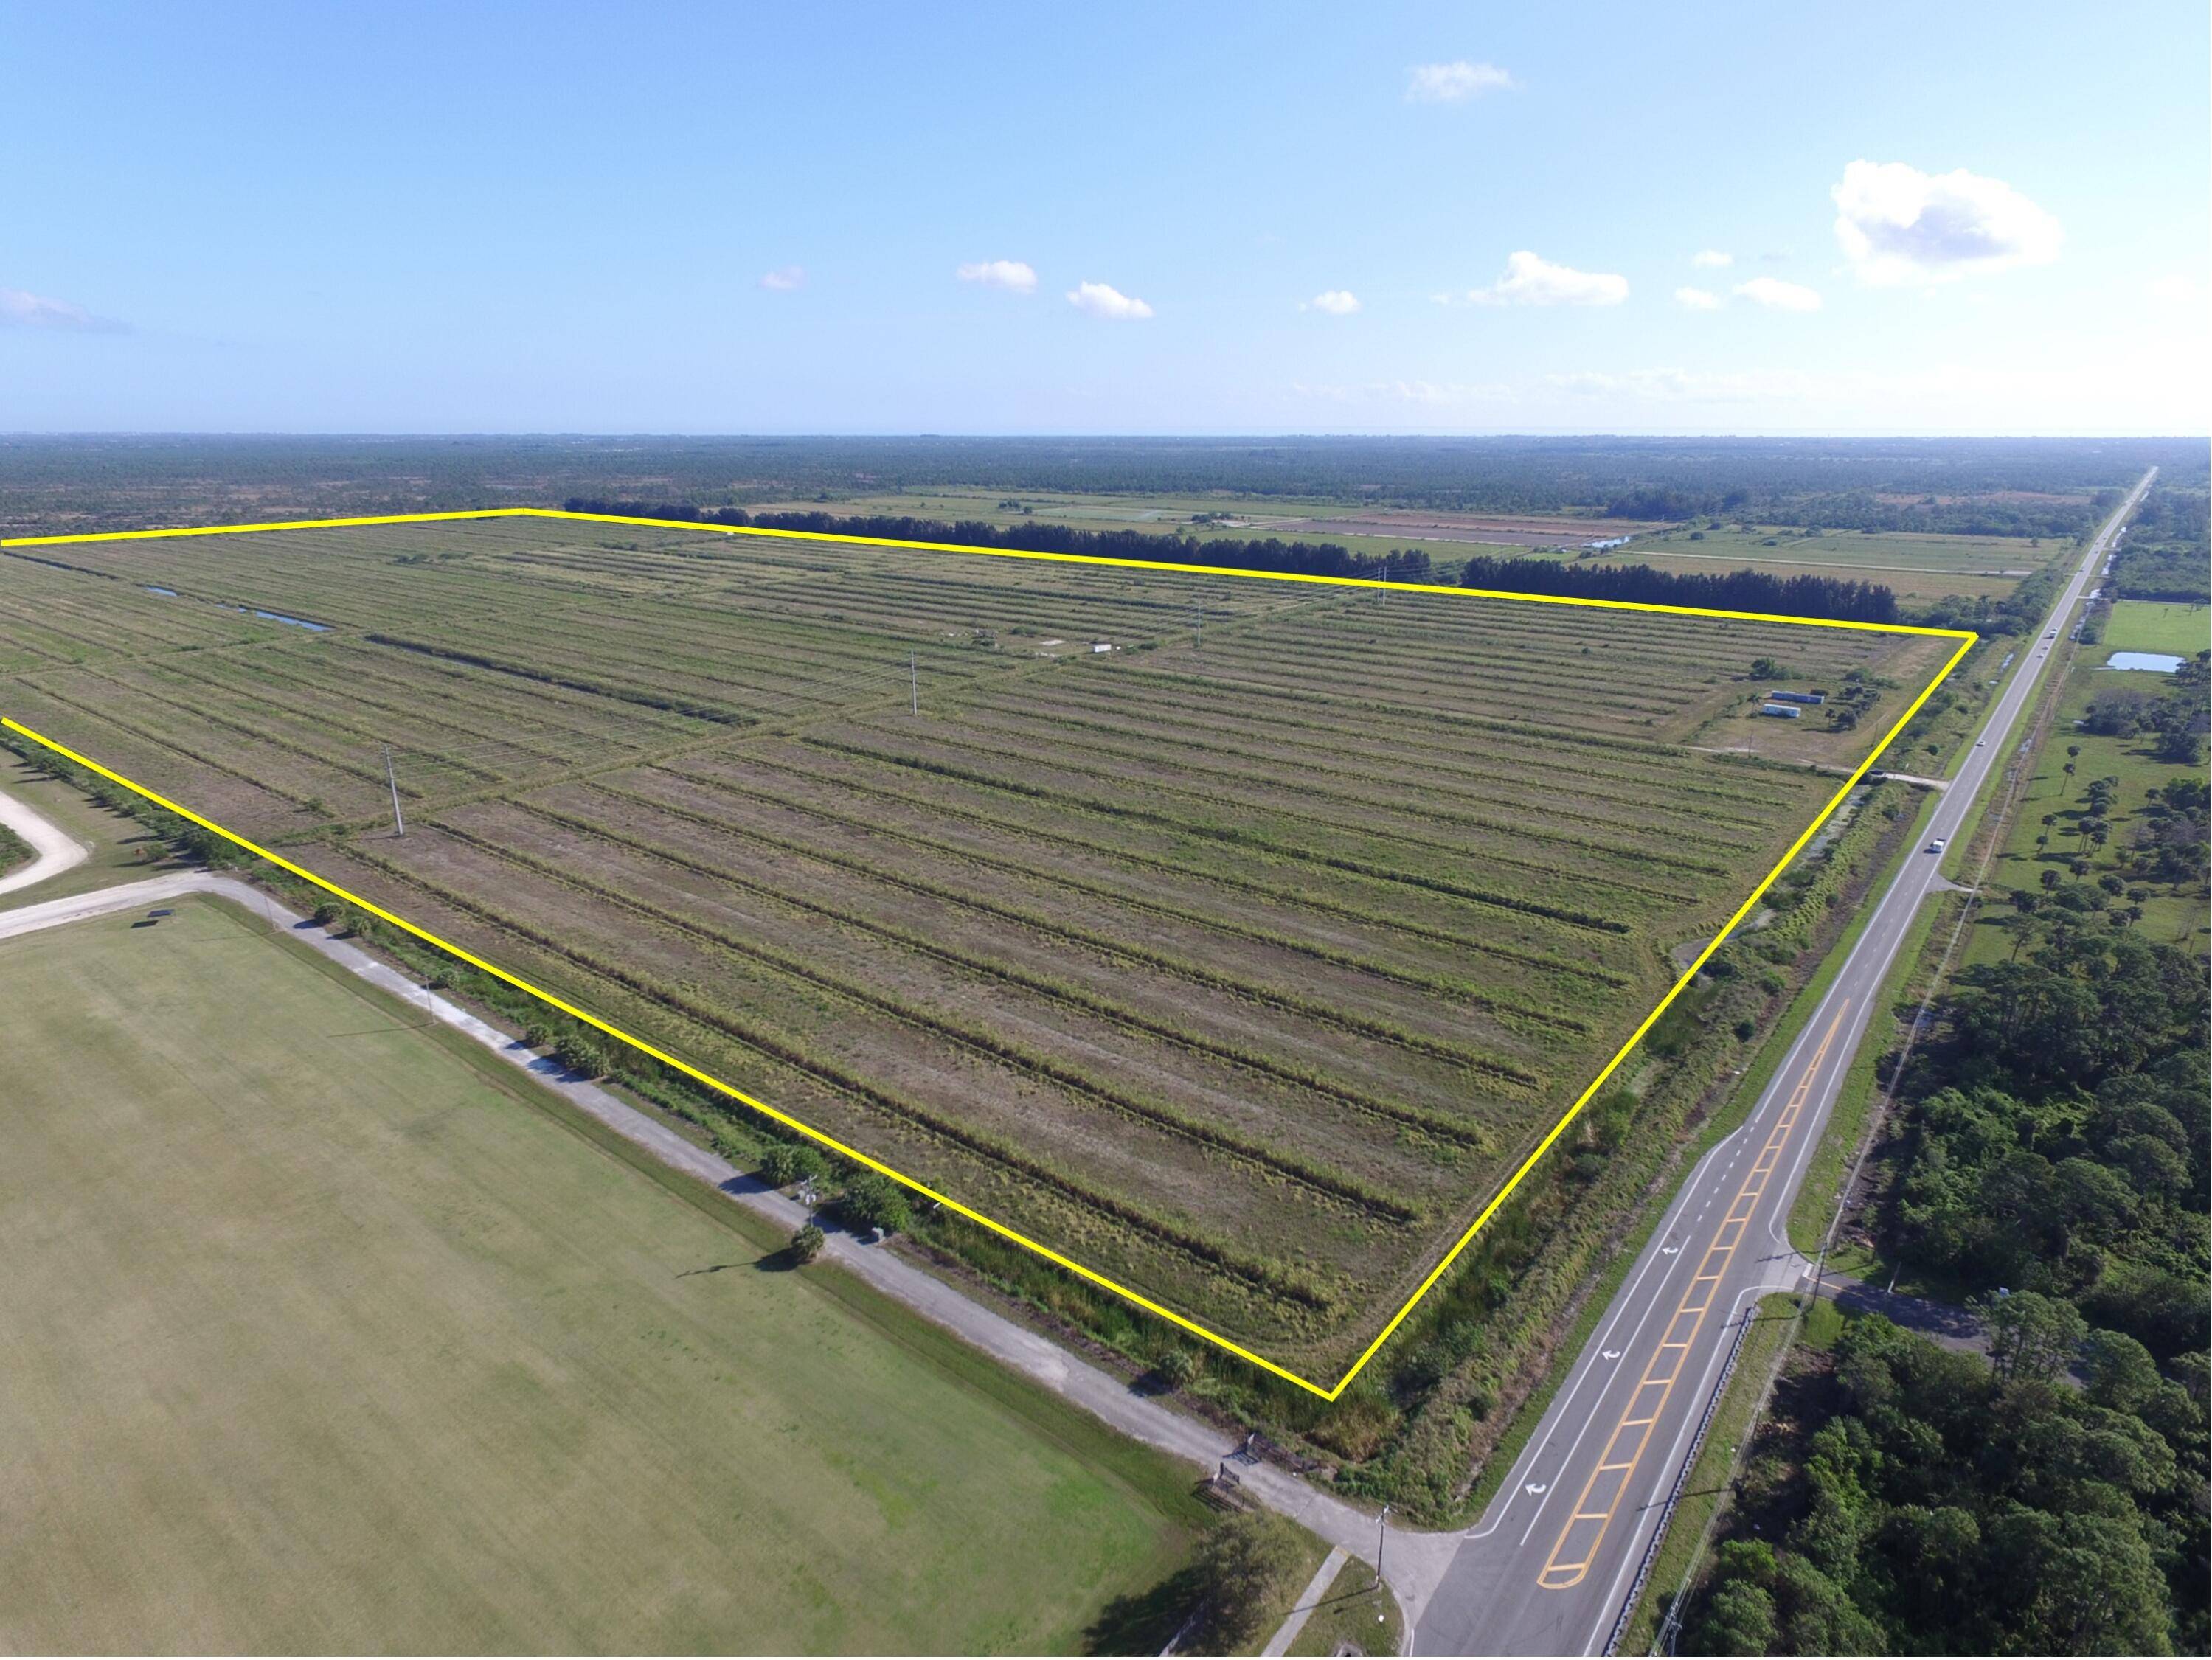 Prime development opportunity of 318 acres in desirable Hobe Sound location.